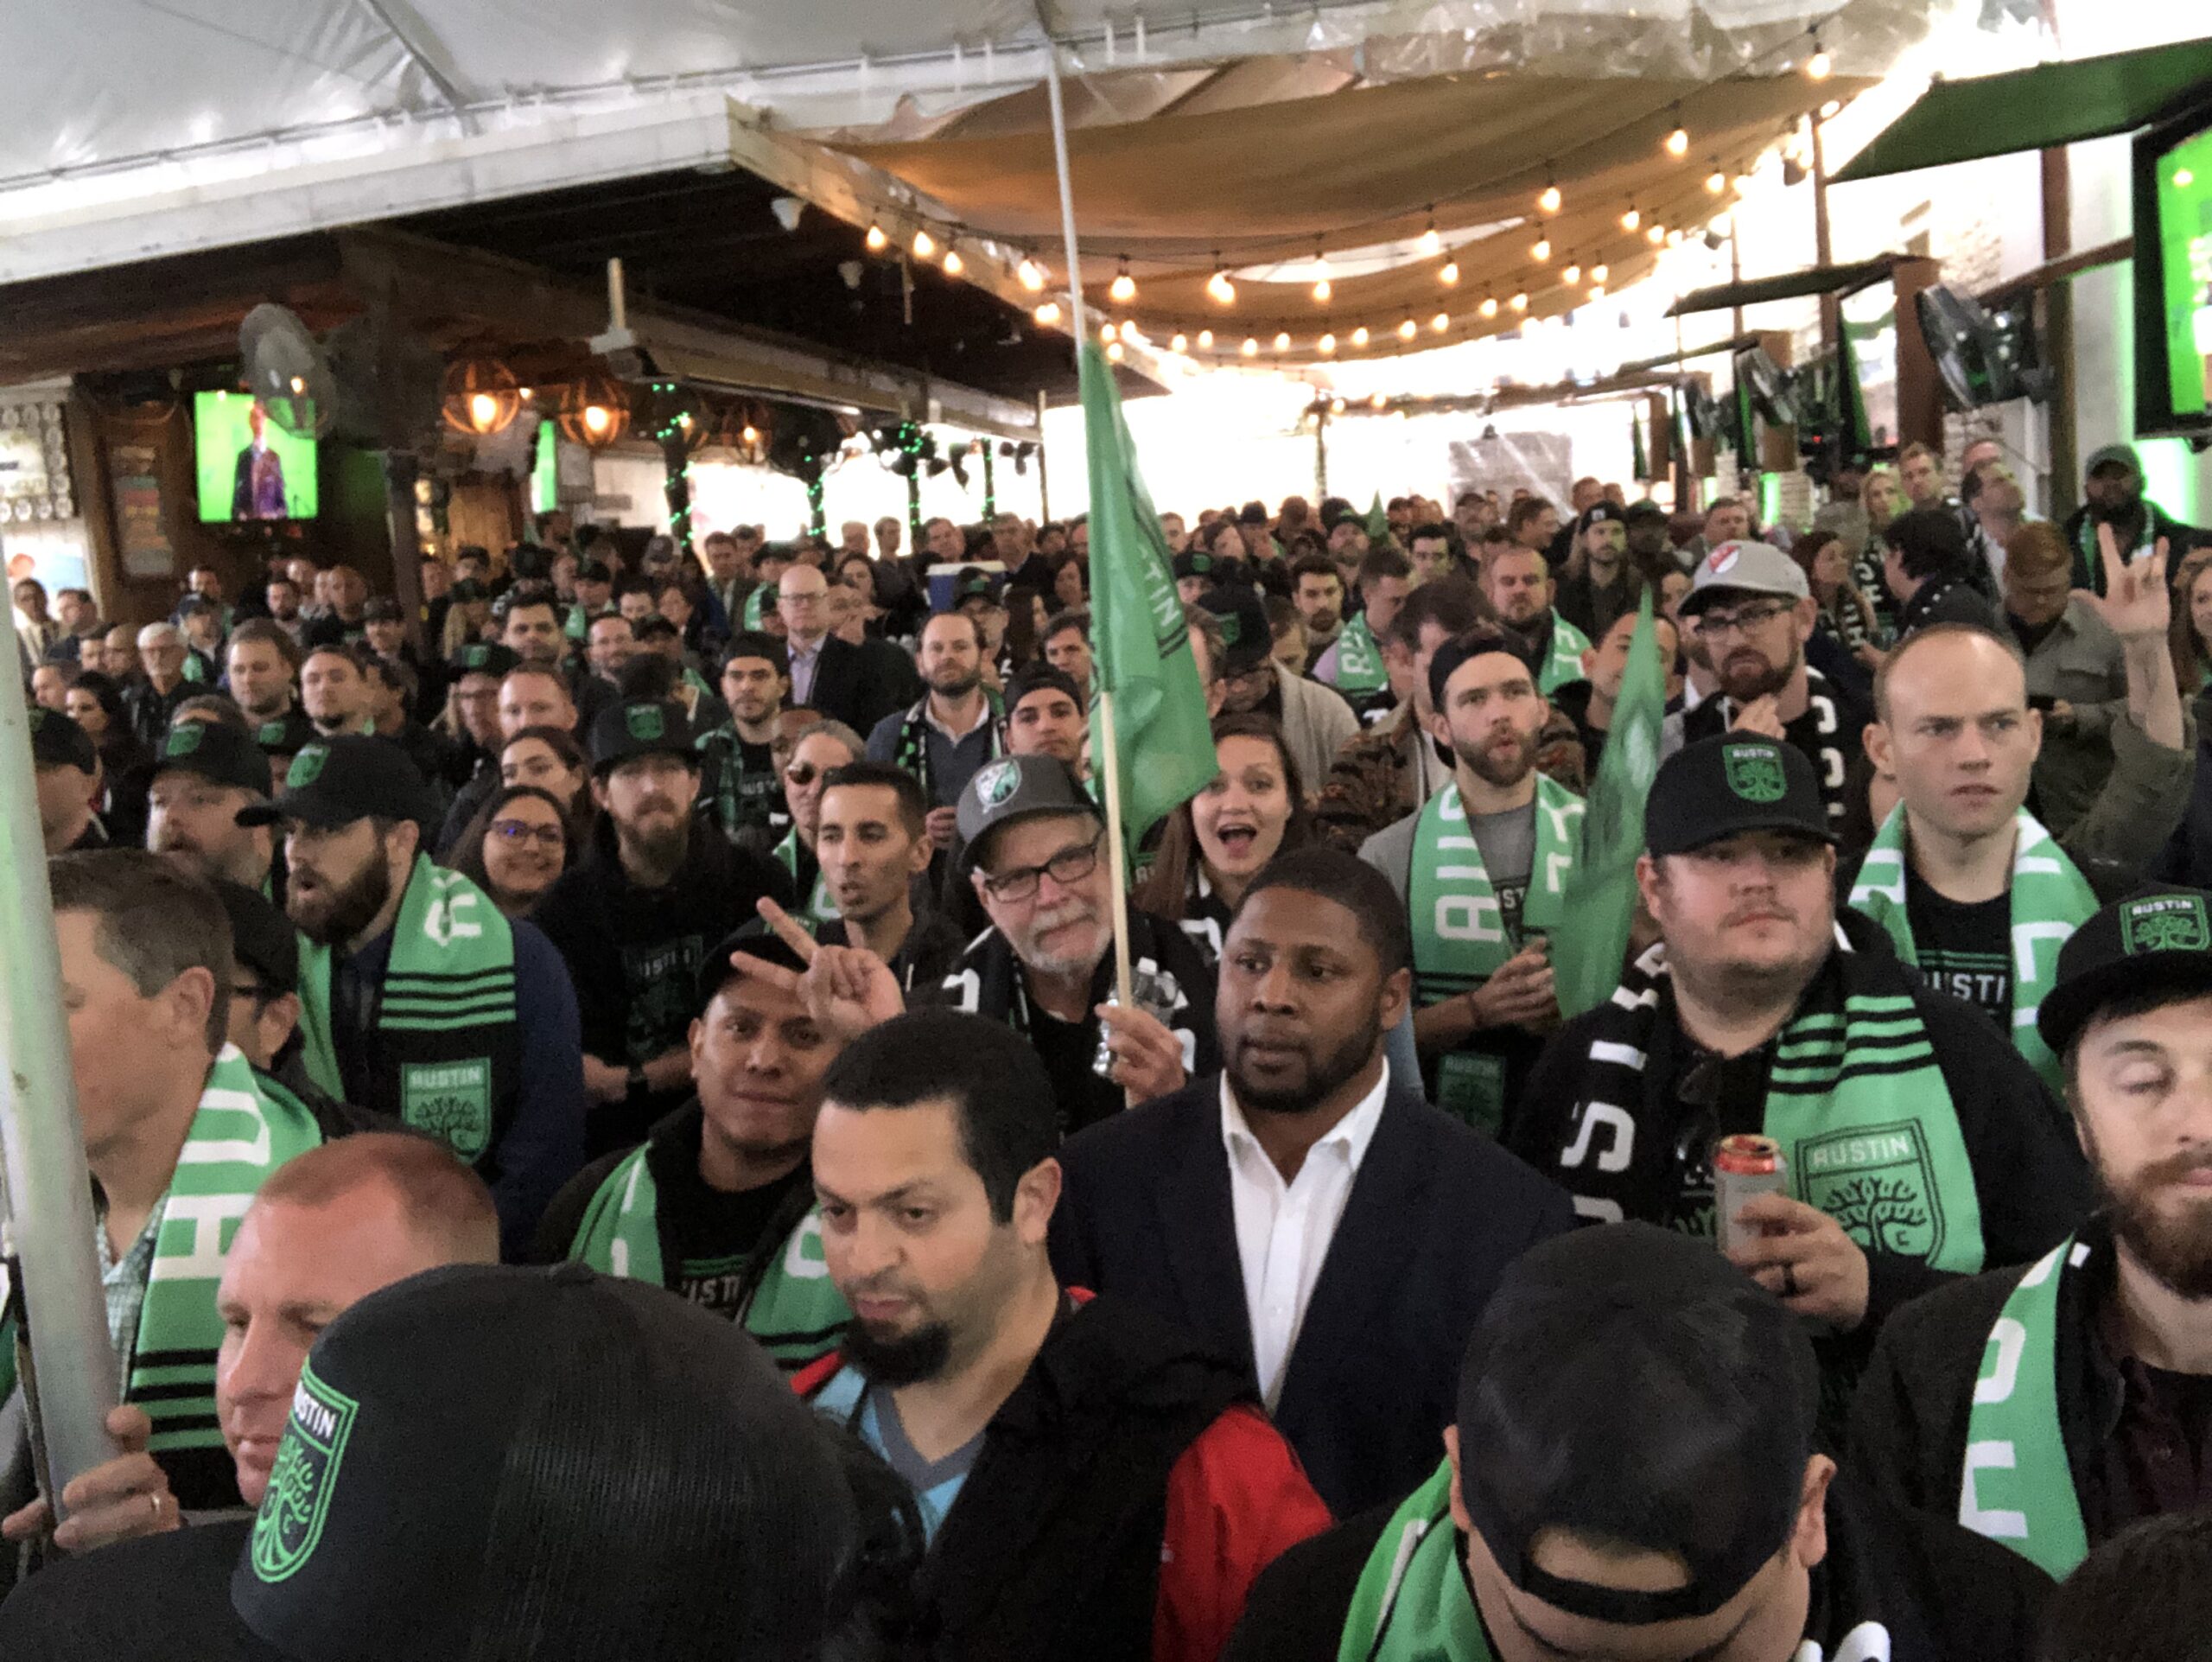 The excited crowd celebrates the official news of Austin FC in MLS